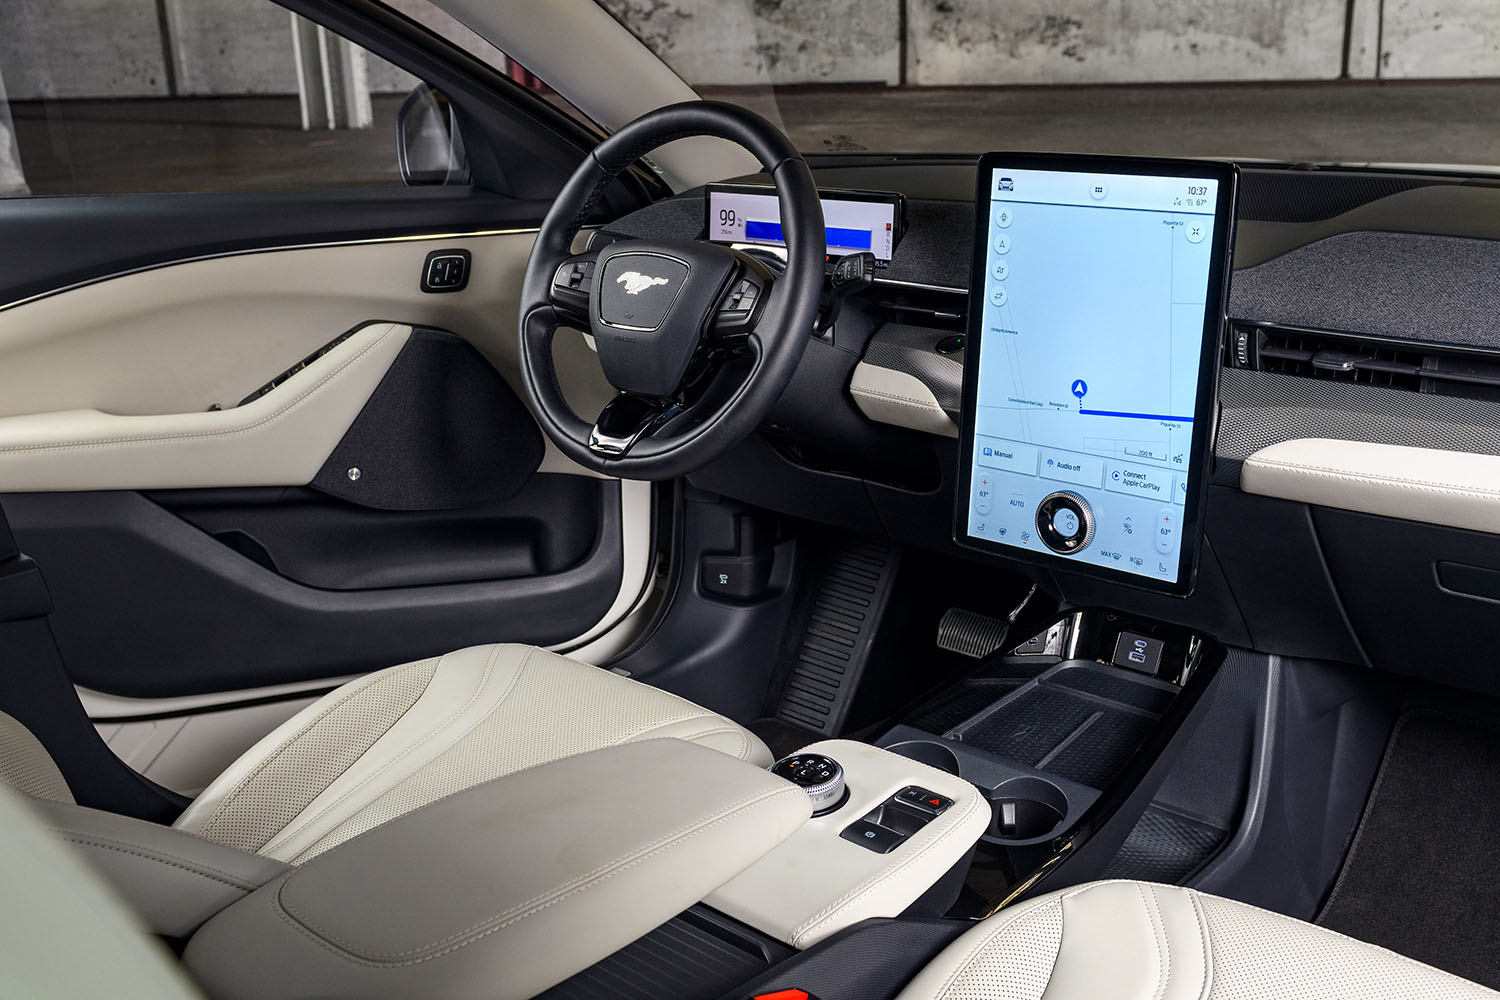 2022 Ford Mustang Mach-E interior, Ice White appearance package